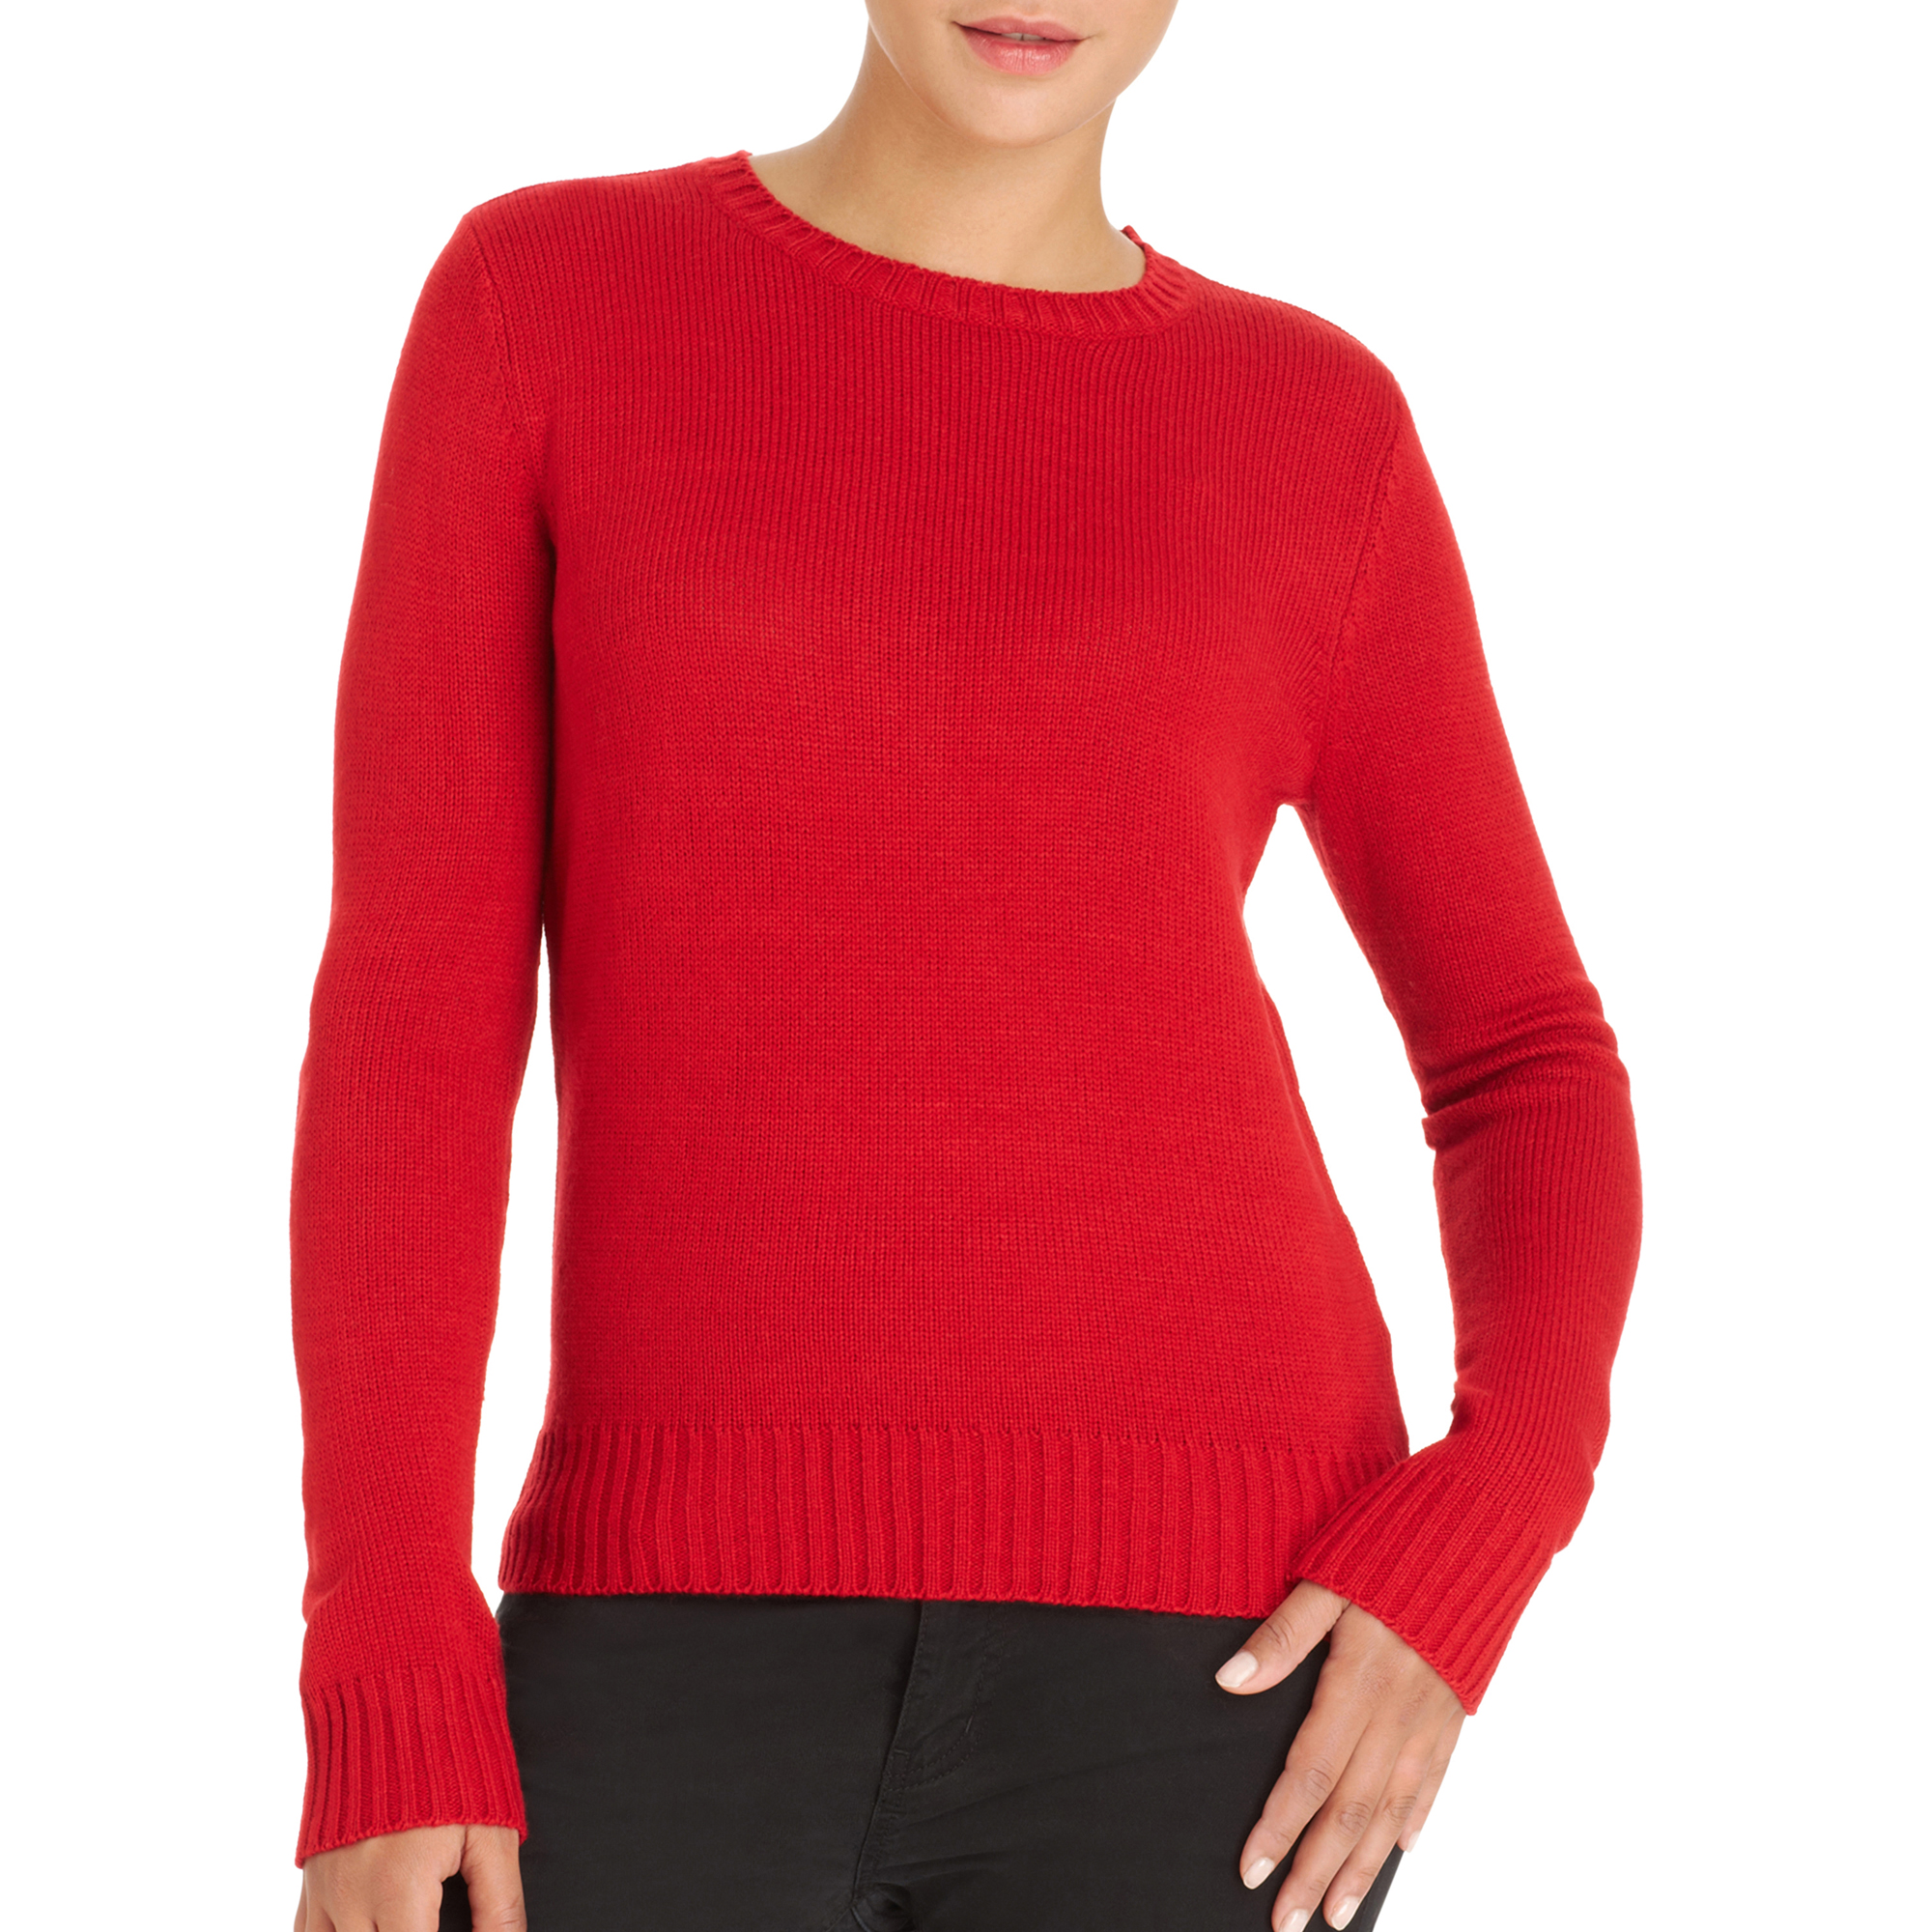 Women's Collection Crew Neck Sweater - image 1 of 2